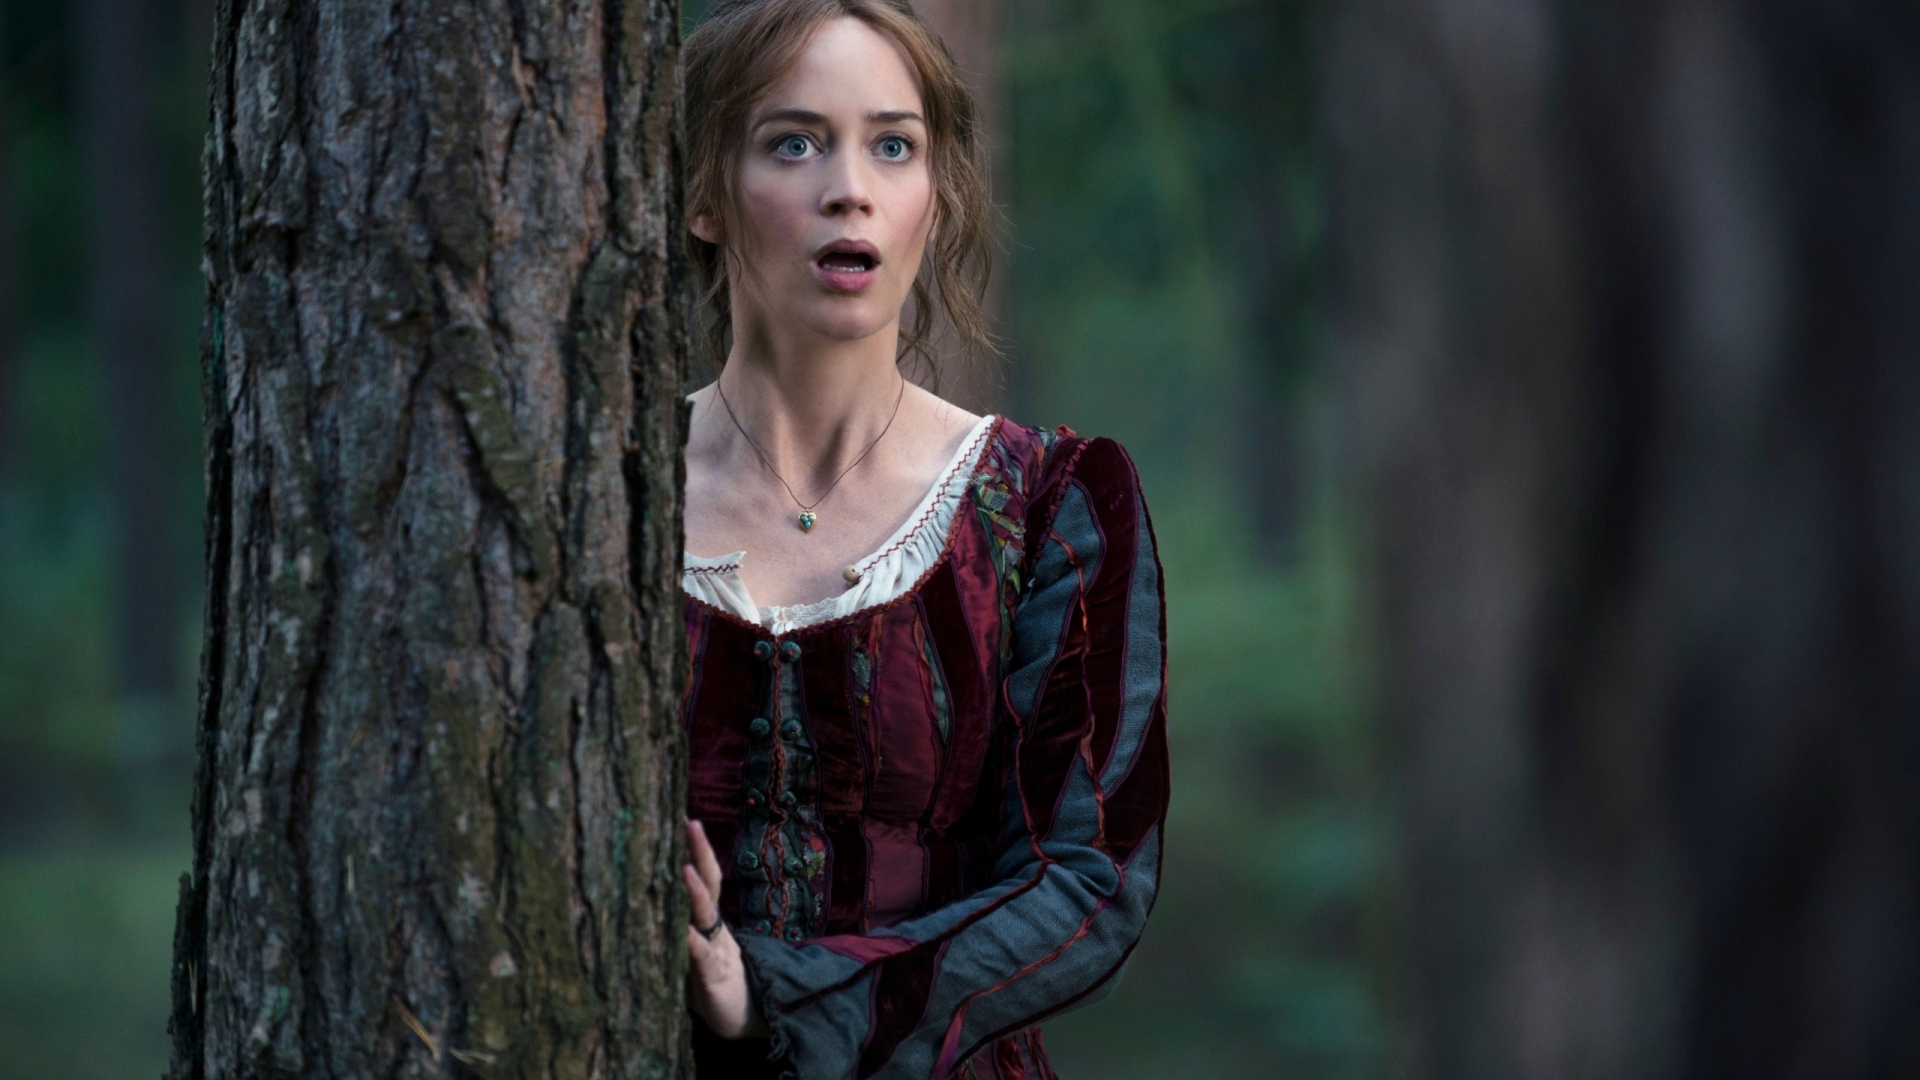 Into the Woods Emily Blunt for 1920 x 1080 HDTV 1080p resolution